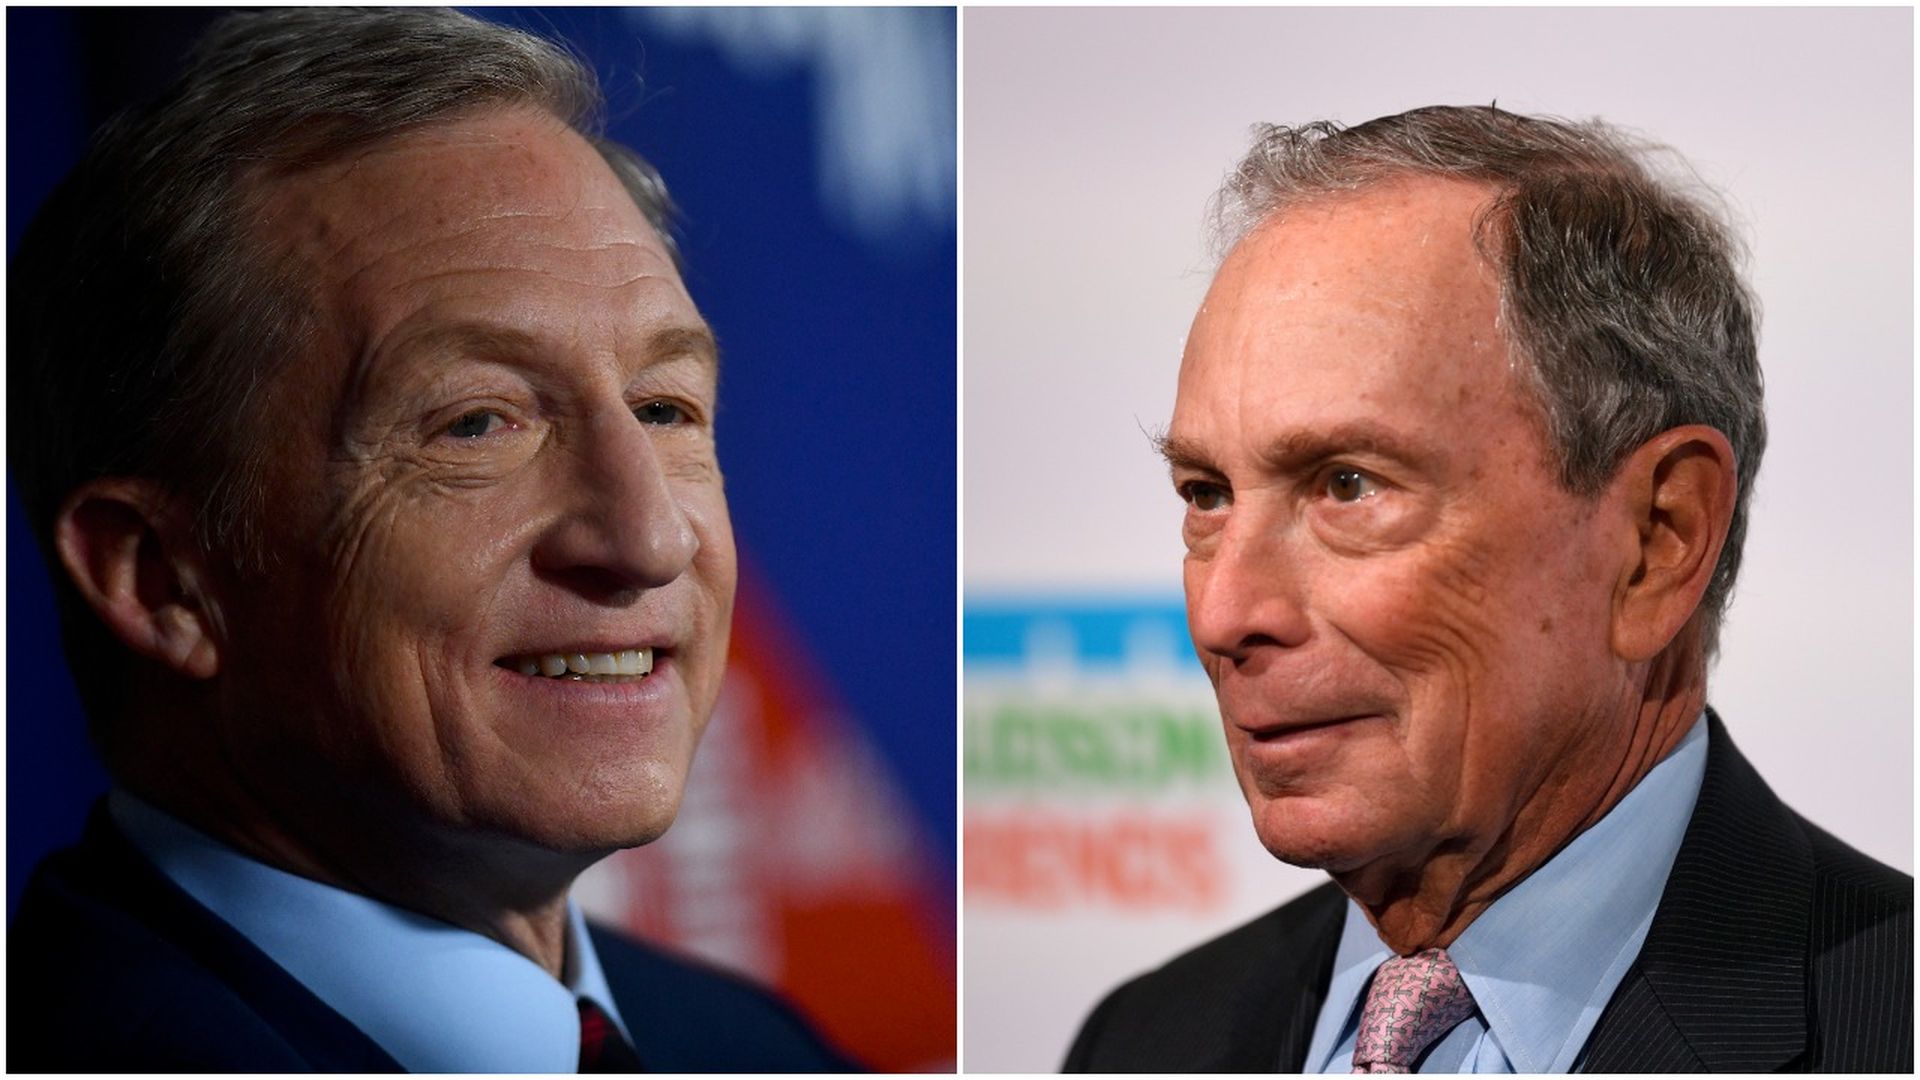 This image is a split-screen of Tom Steyer and Michael Bloomberg.